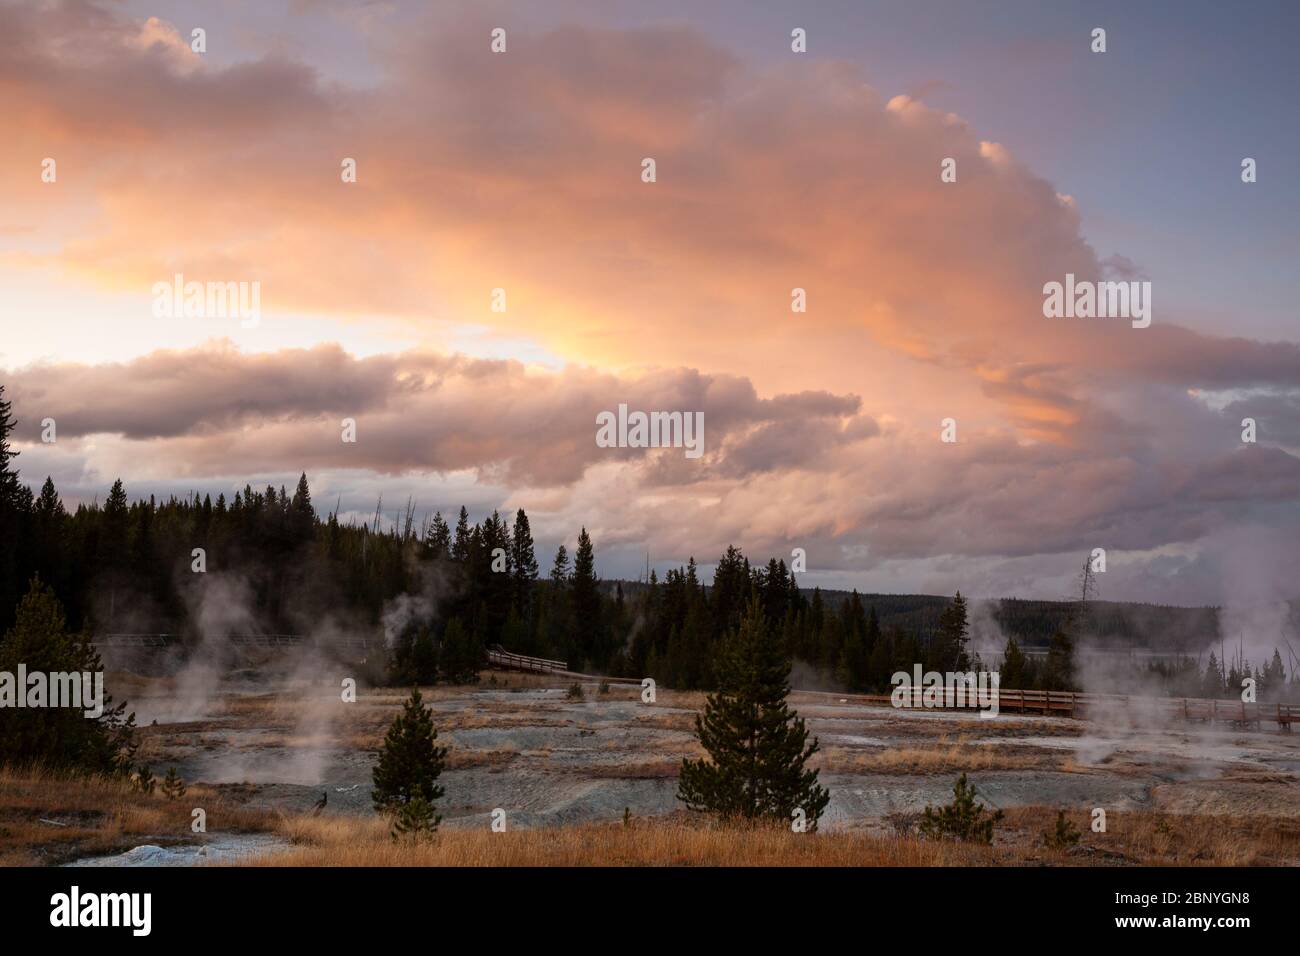 WY04387-00...WYOMING - Sunset at West Thumb Geyser Basin in Yellowstone National Park. Stock Photo